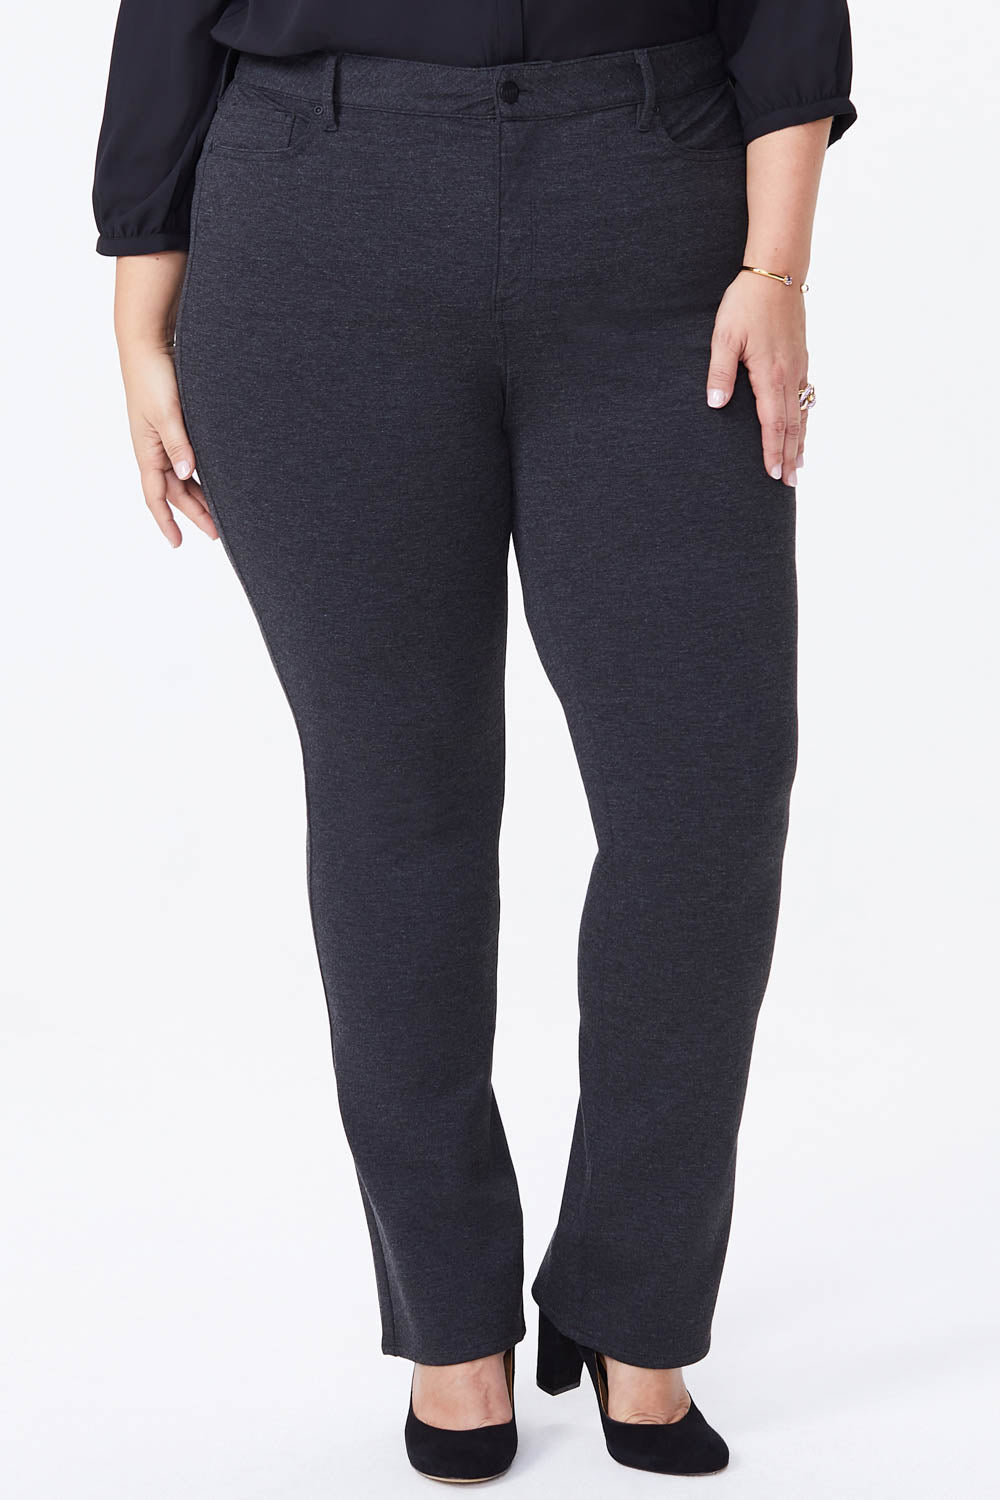 Marilyn Straight Pants In Plus Size - Charcoal Heathered